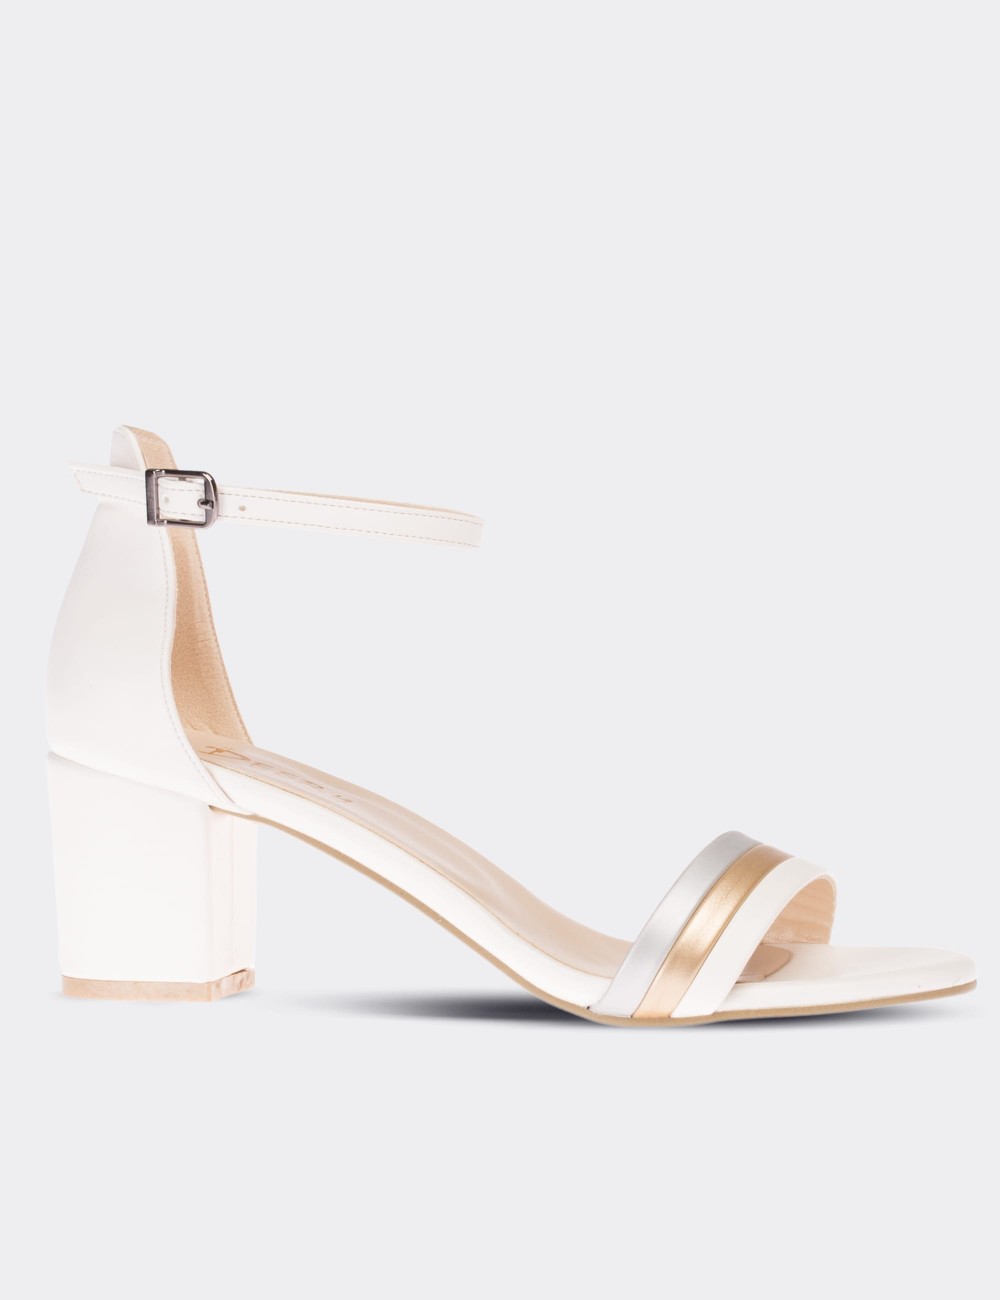 White Leather Pumps - 00184ZBYZM01